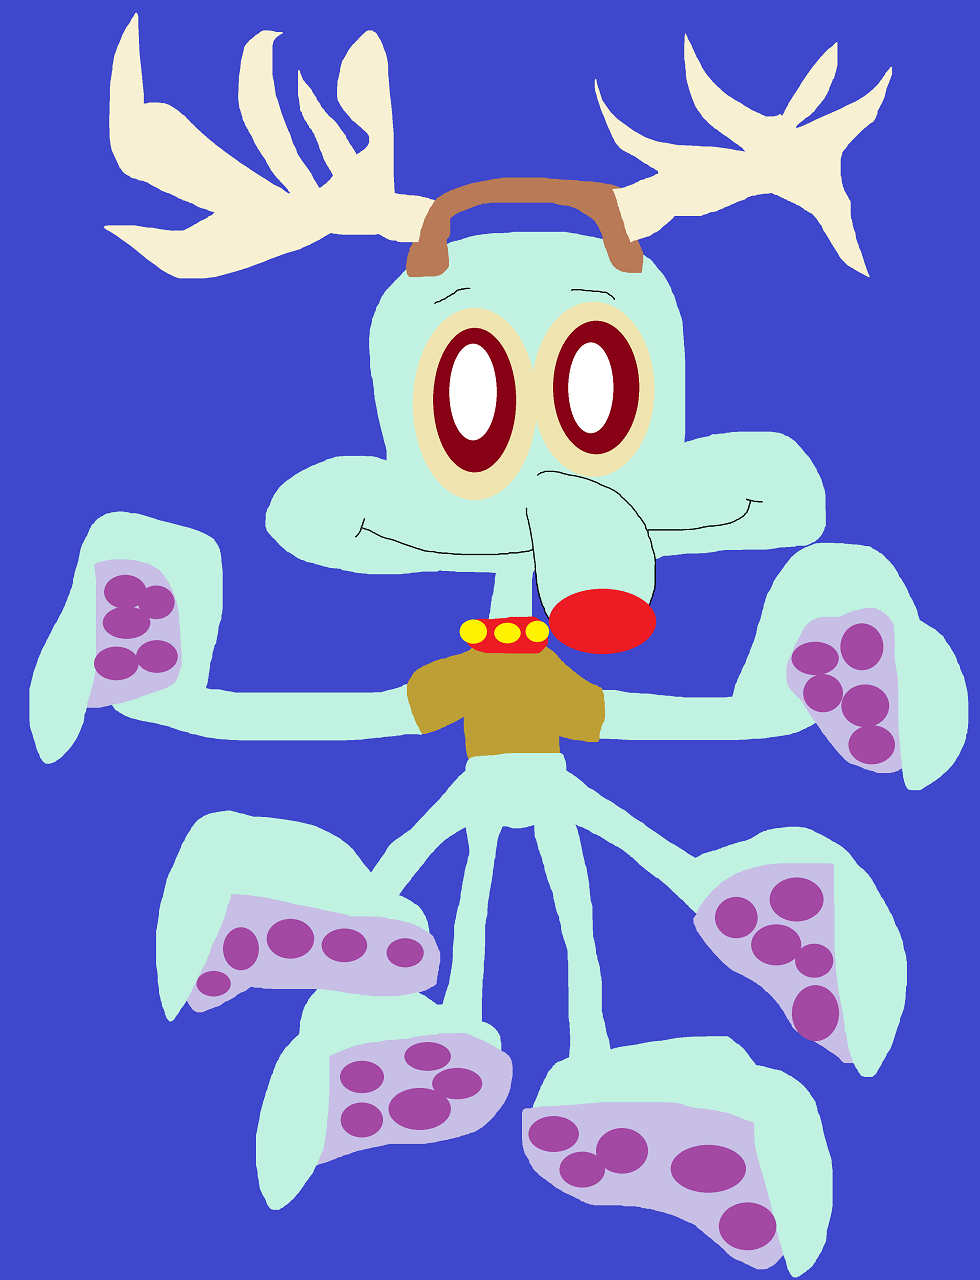 Squidward The Red Nosed Cephalopod by Falconlobo